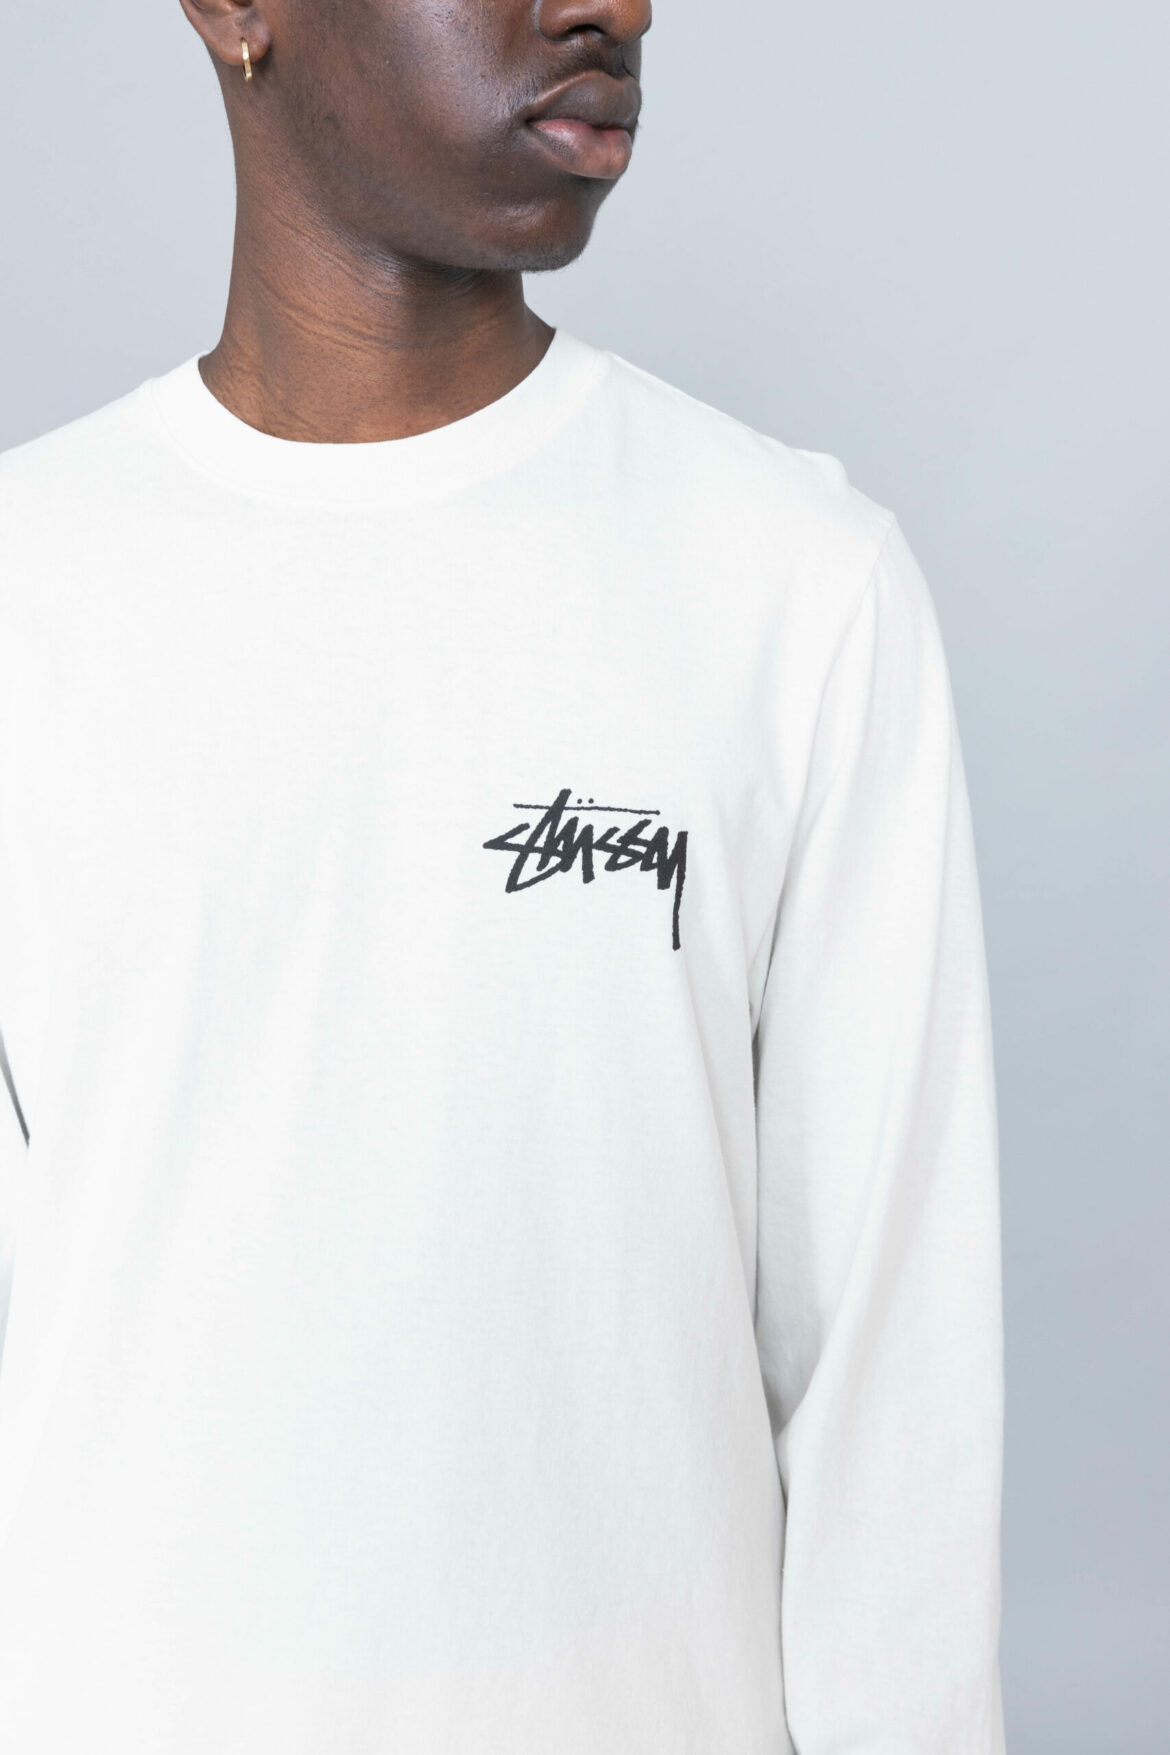 Stussy Spring Weeds Pigment Dyed LS Tee White nike - Centrevillestore